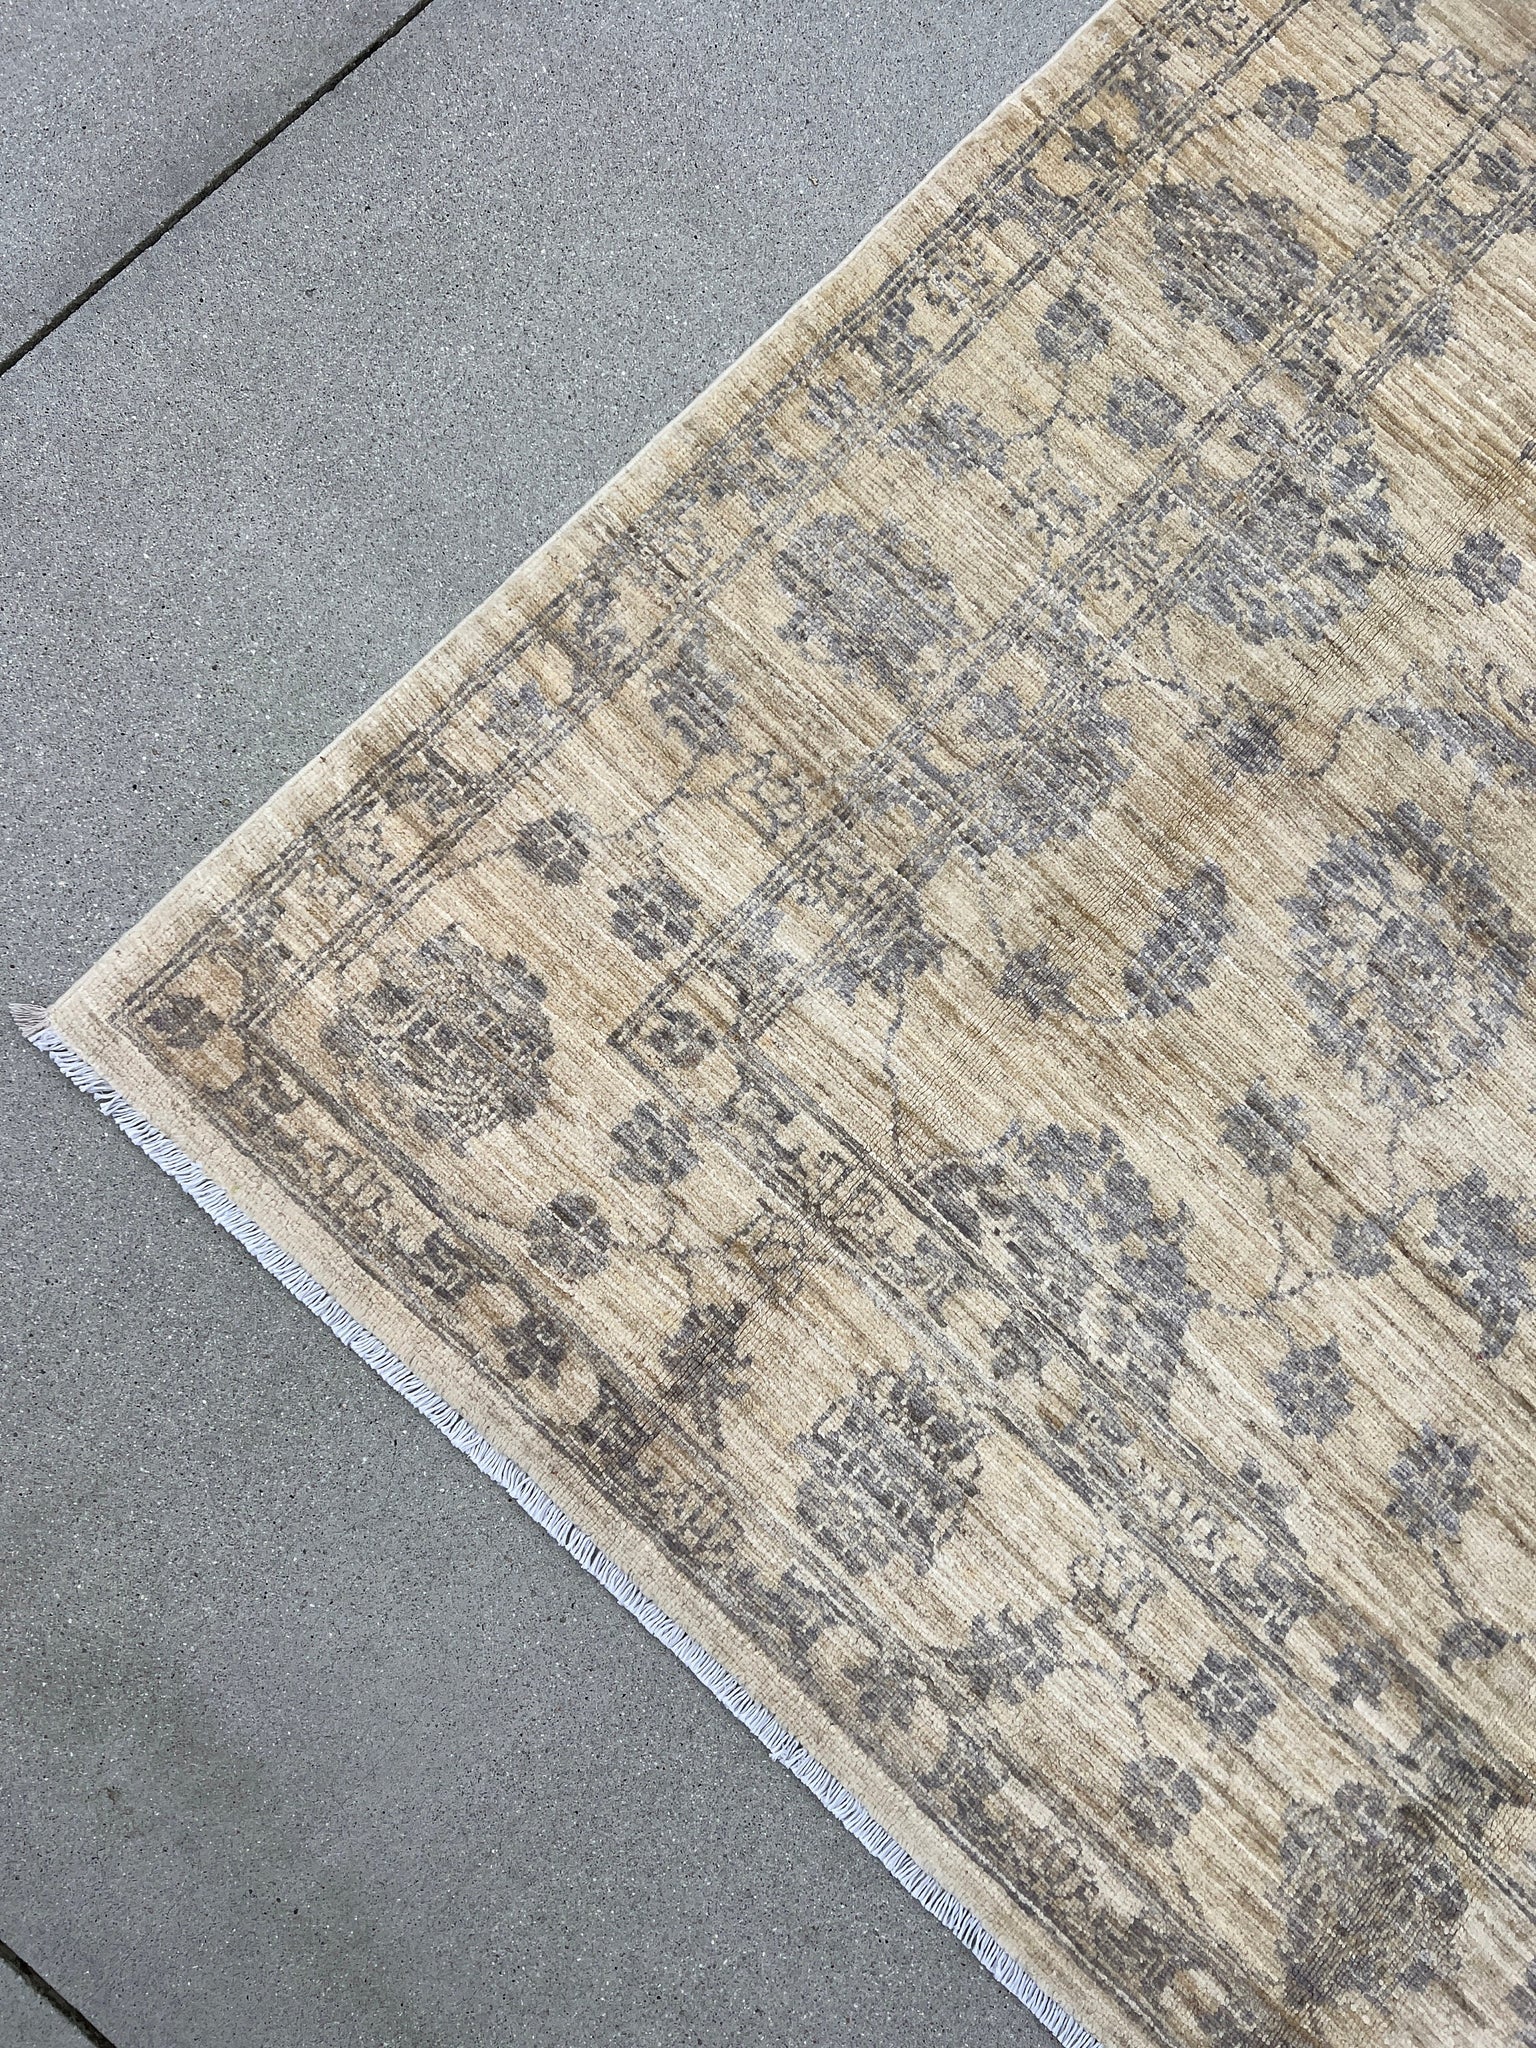 6x8 Handmade Afghan Rug | Muted Neutral Beige Grey | Hand Knotted Persian Bohemian Boho Oushak Persian Distressed